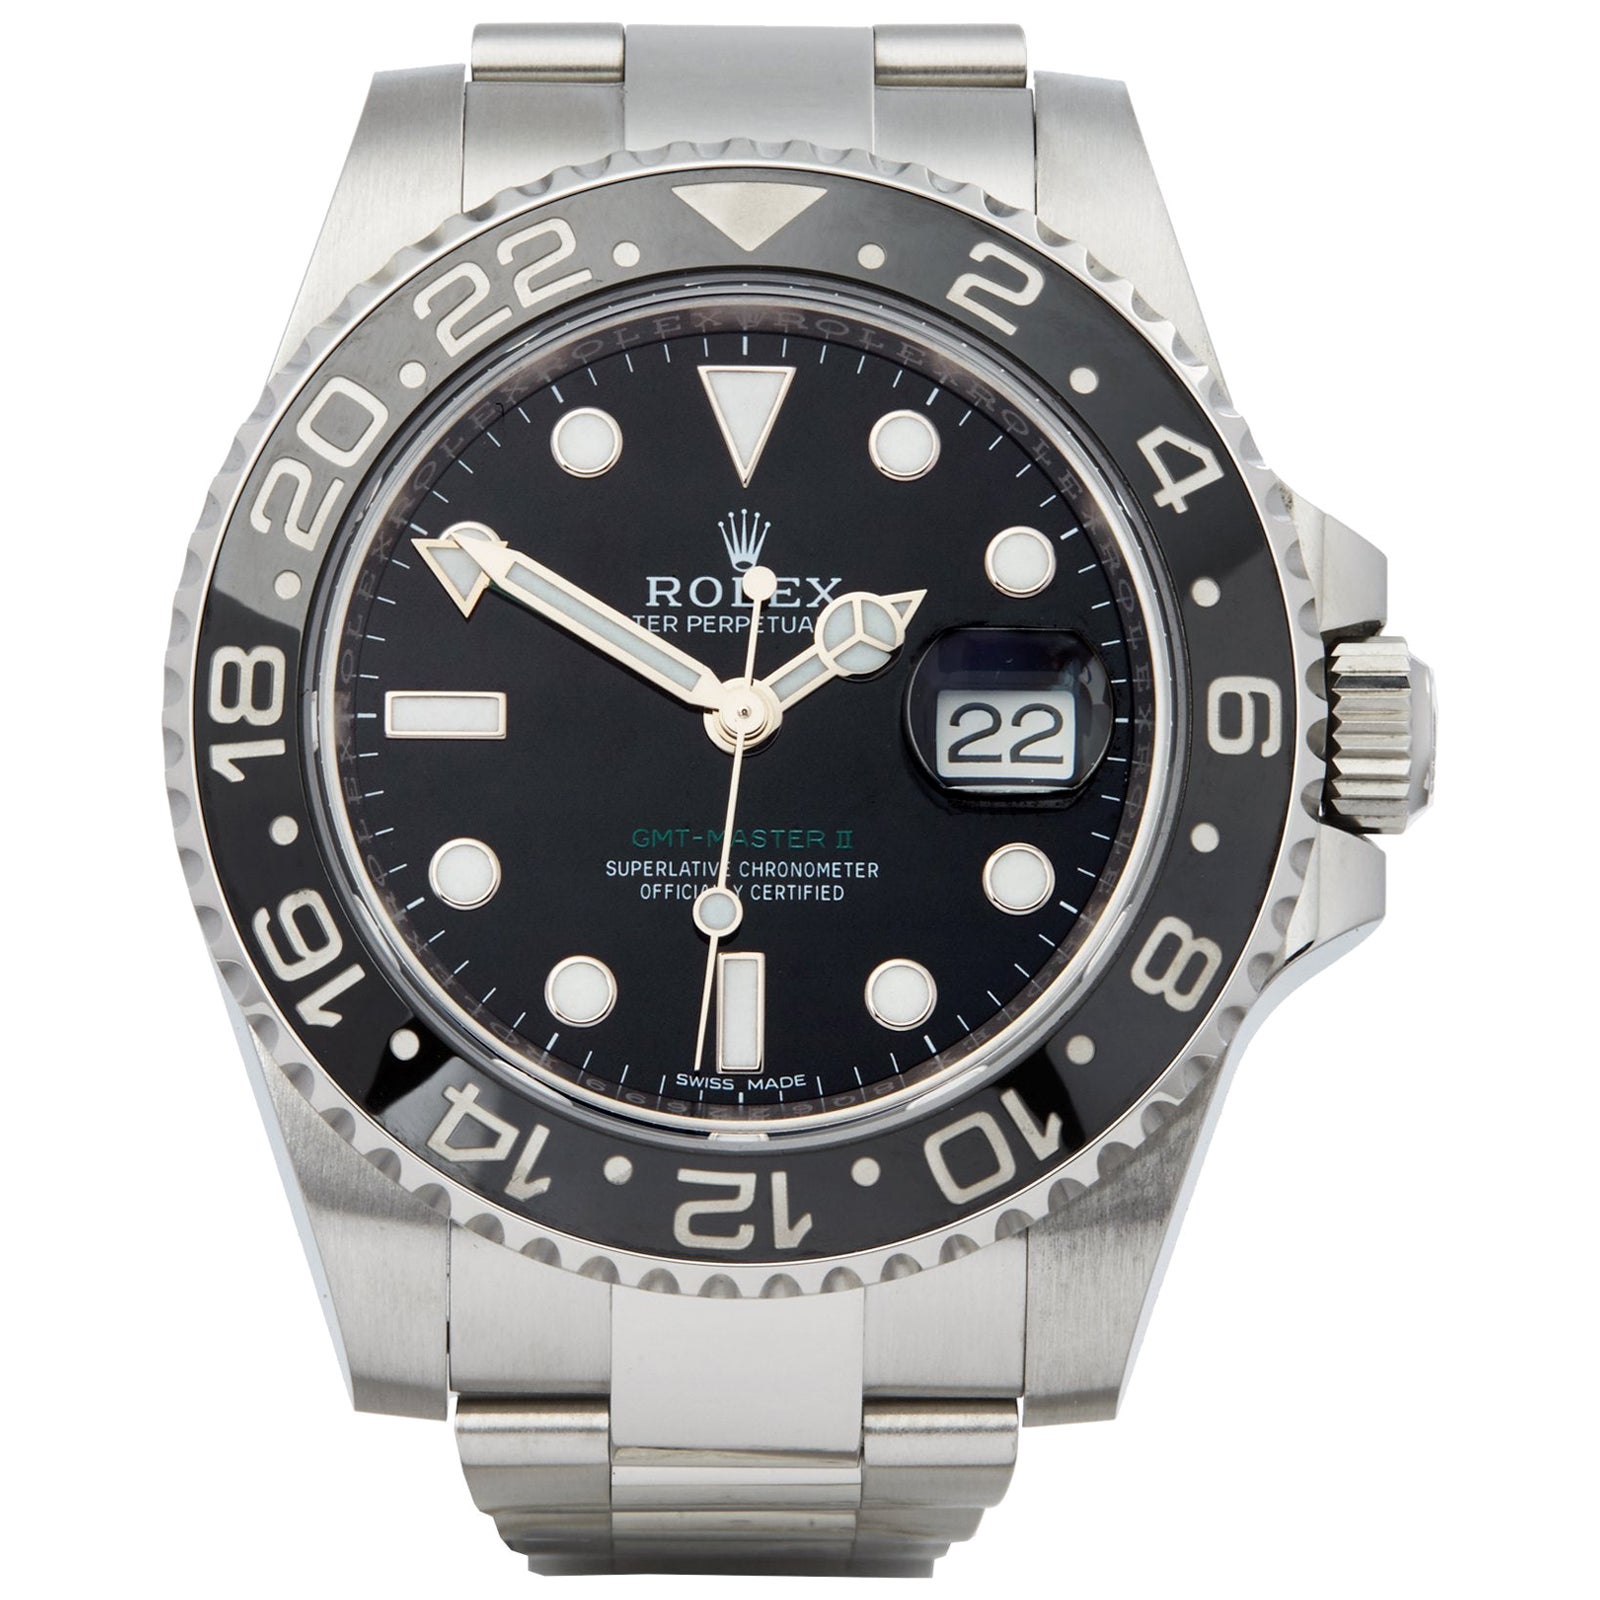 Rolex GMT Master II Steel Automatic Black Watch 116710 LN (box and ...